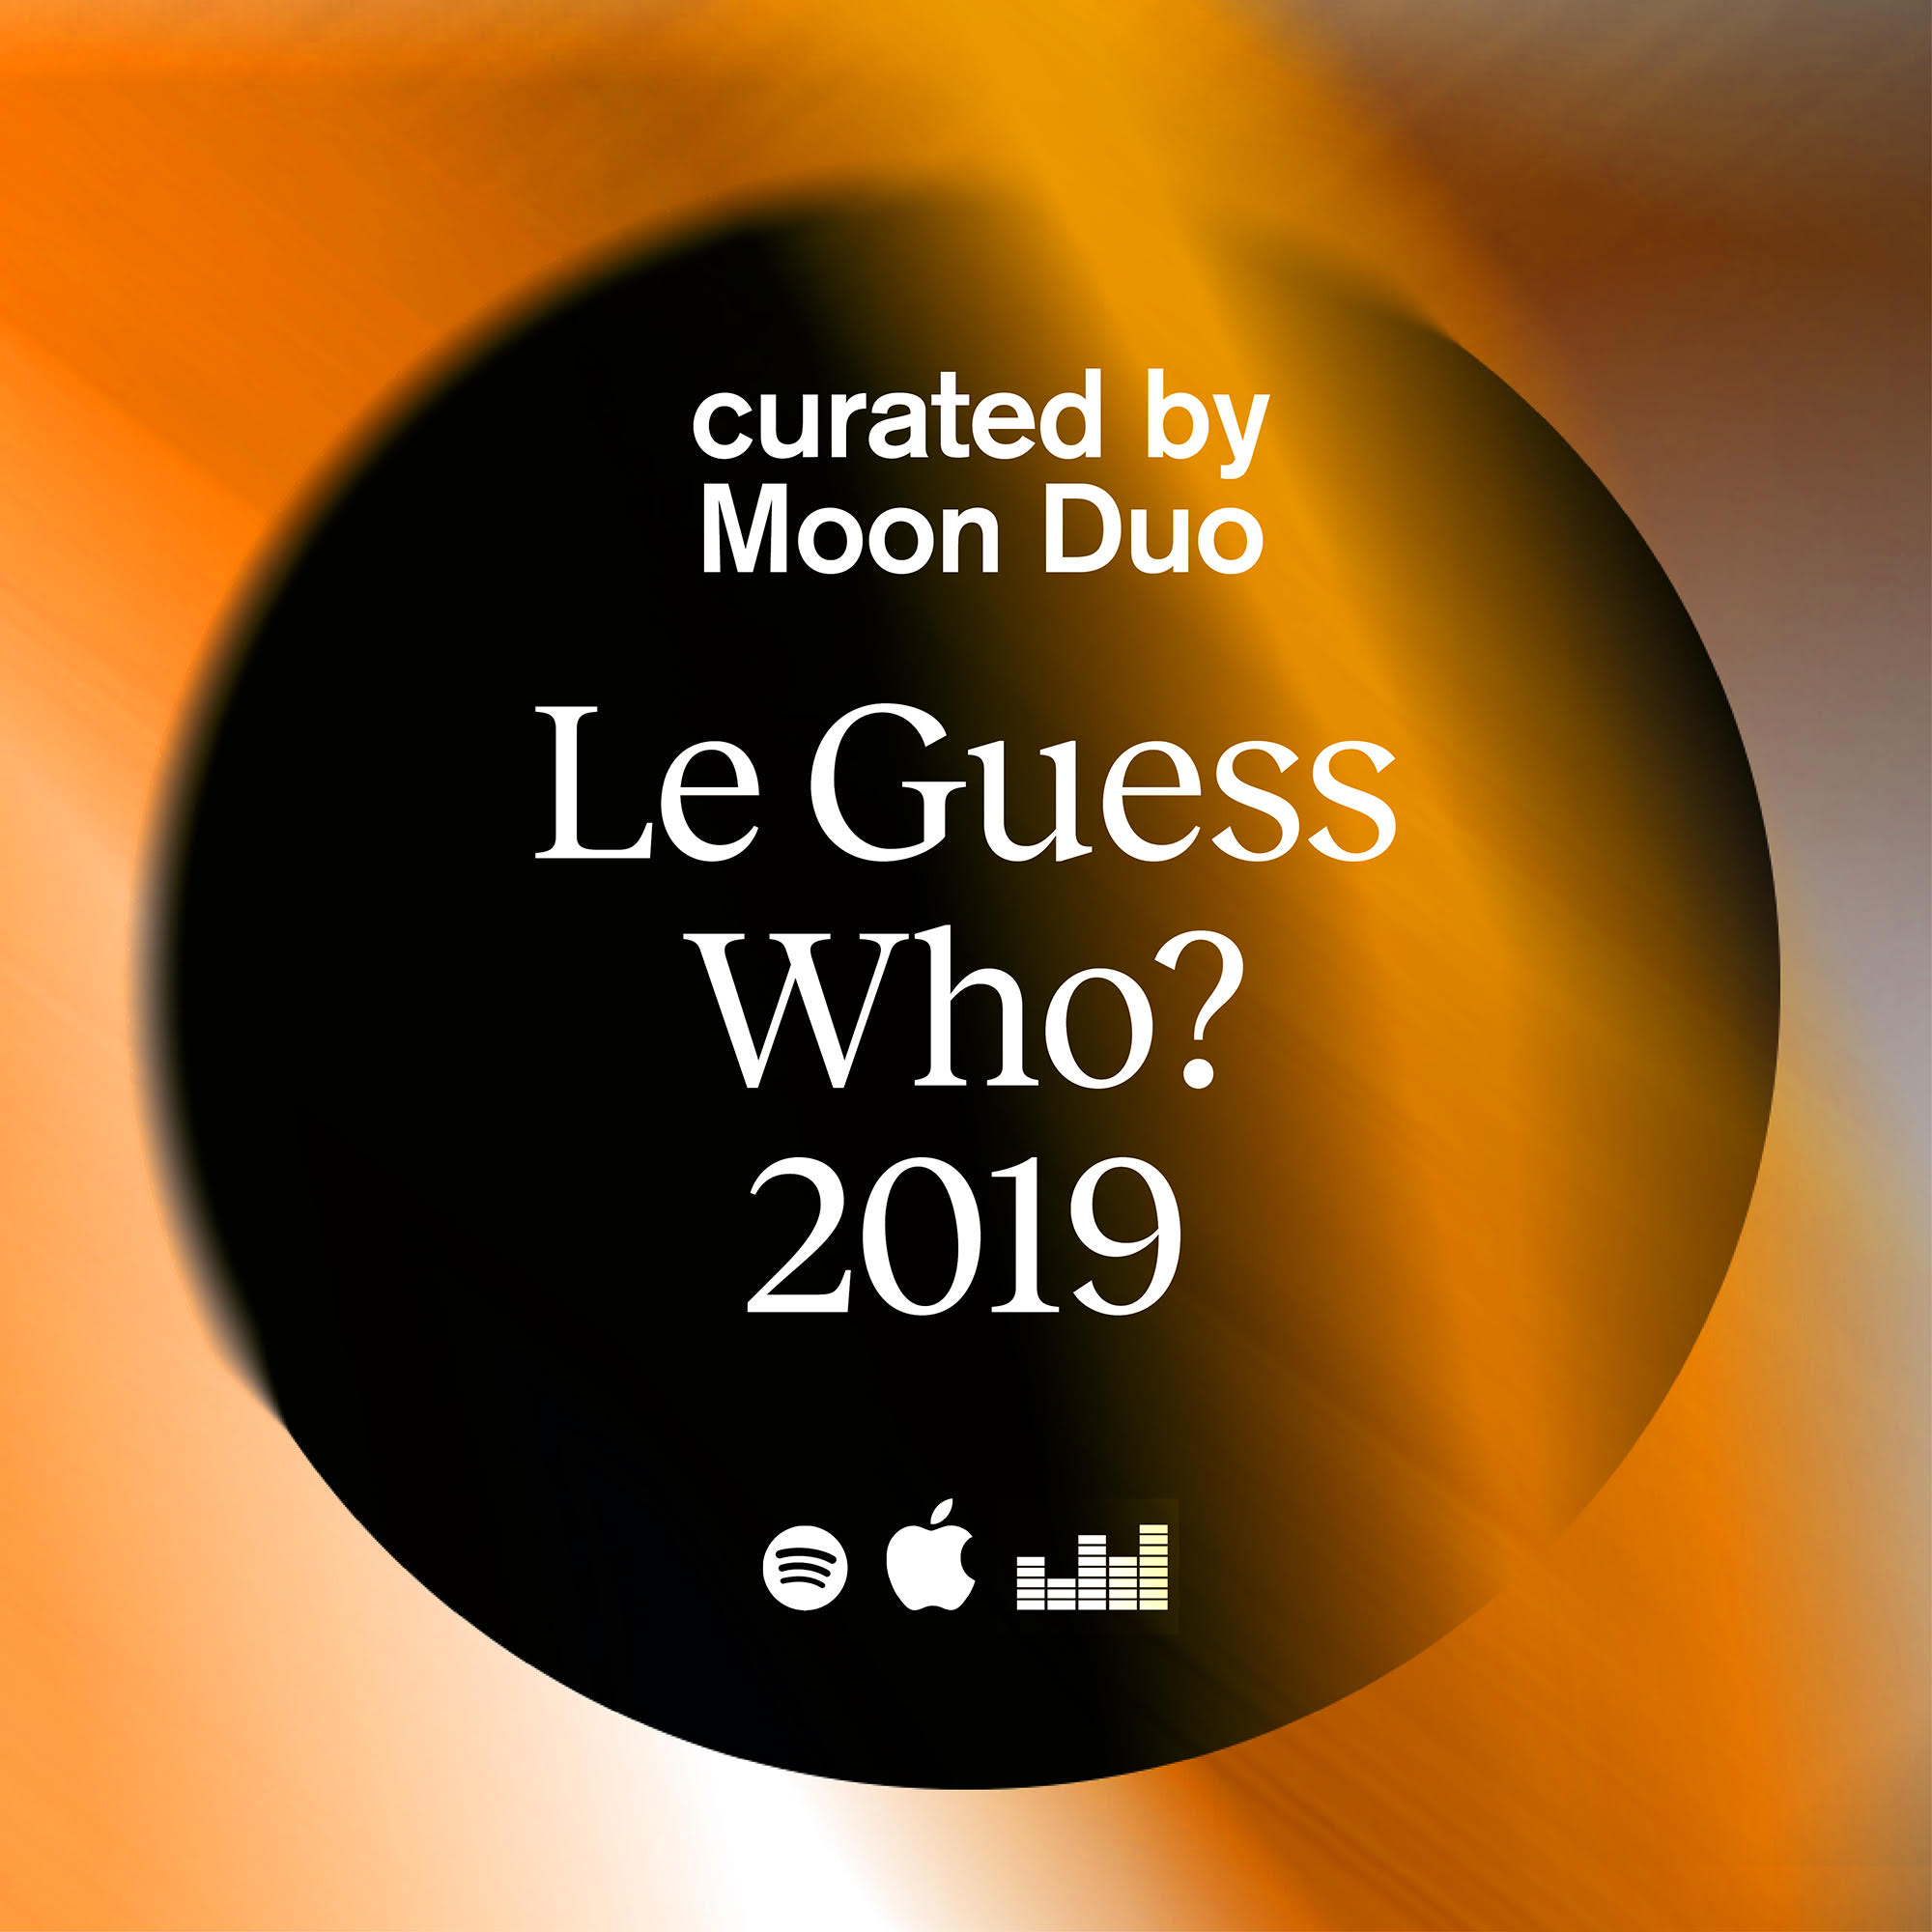 Listen to Moon Duo's personal playlist for their curation at Le Guess Who? 2019